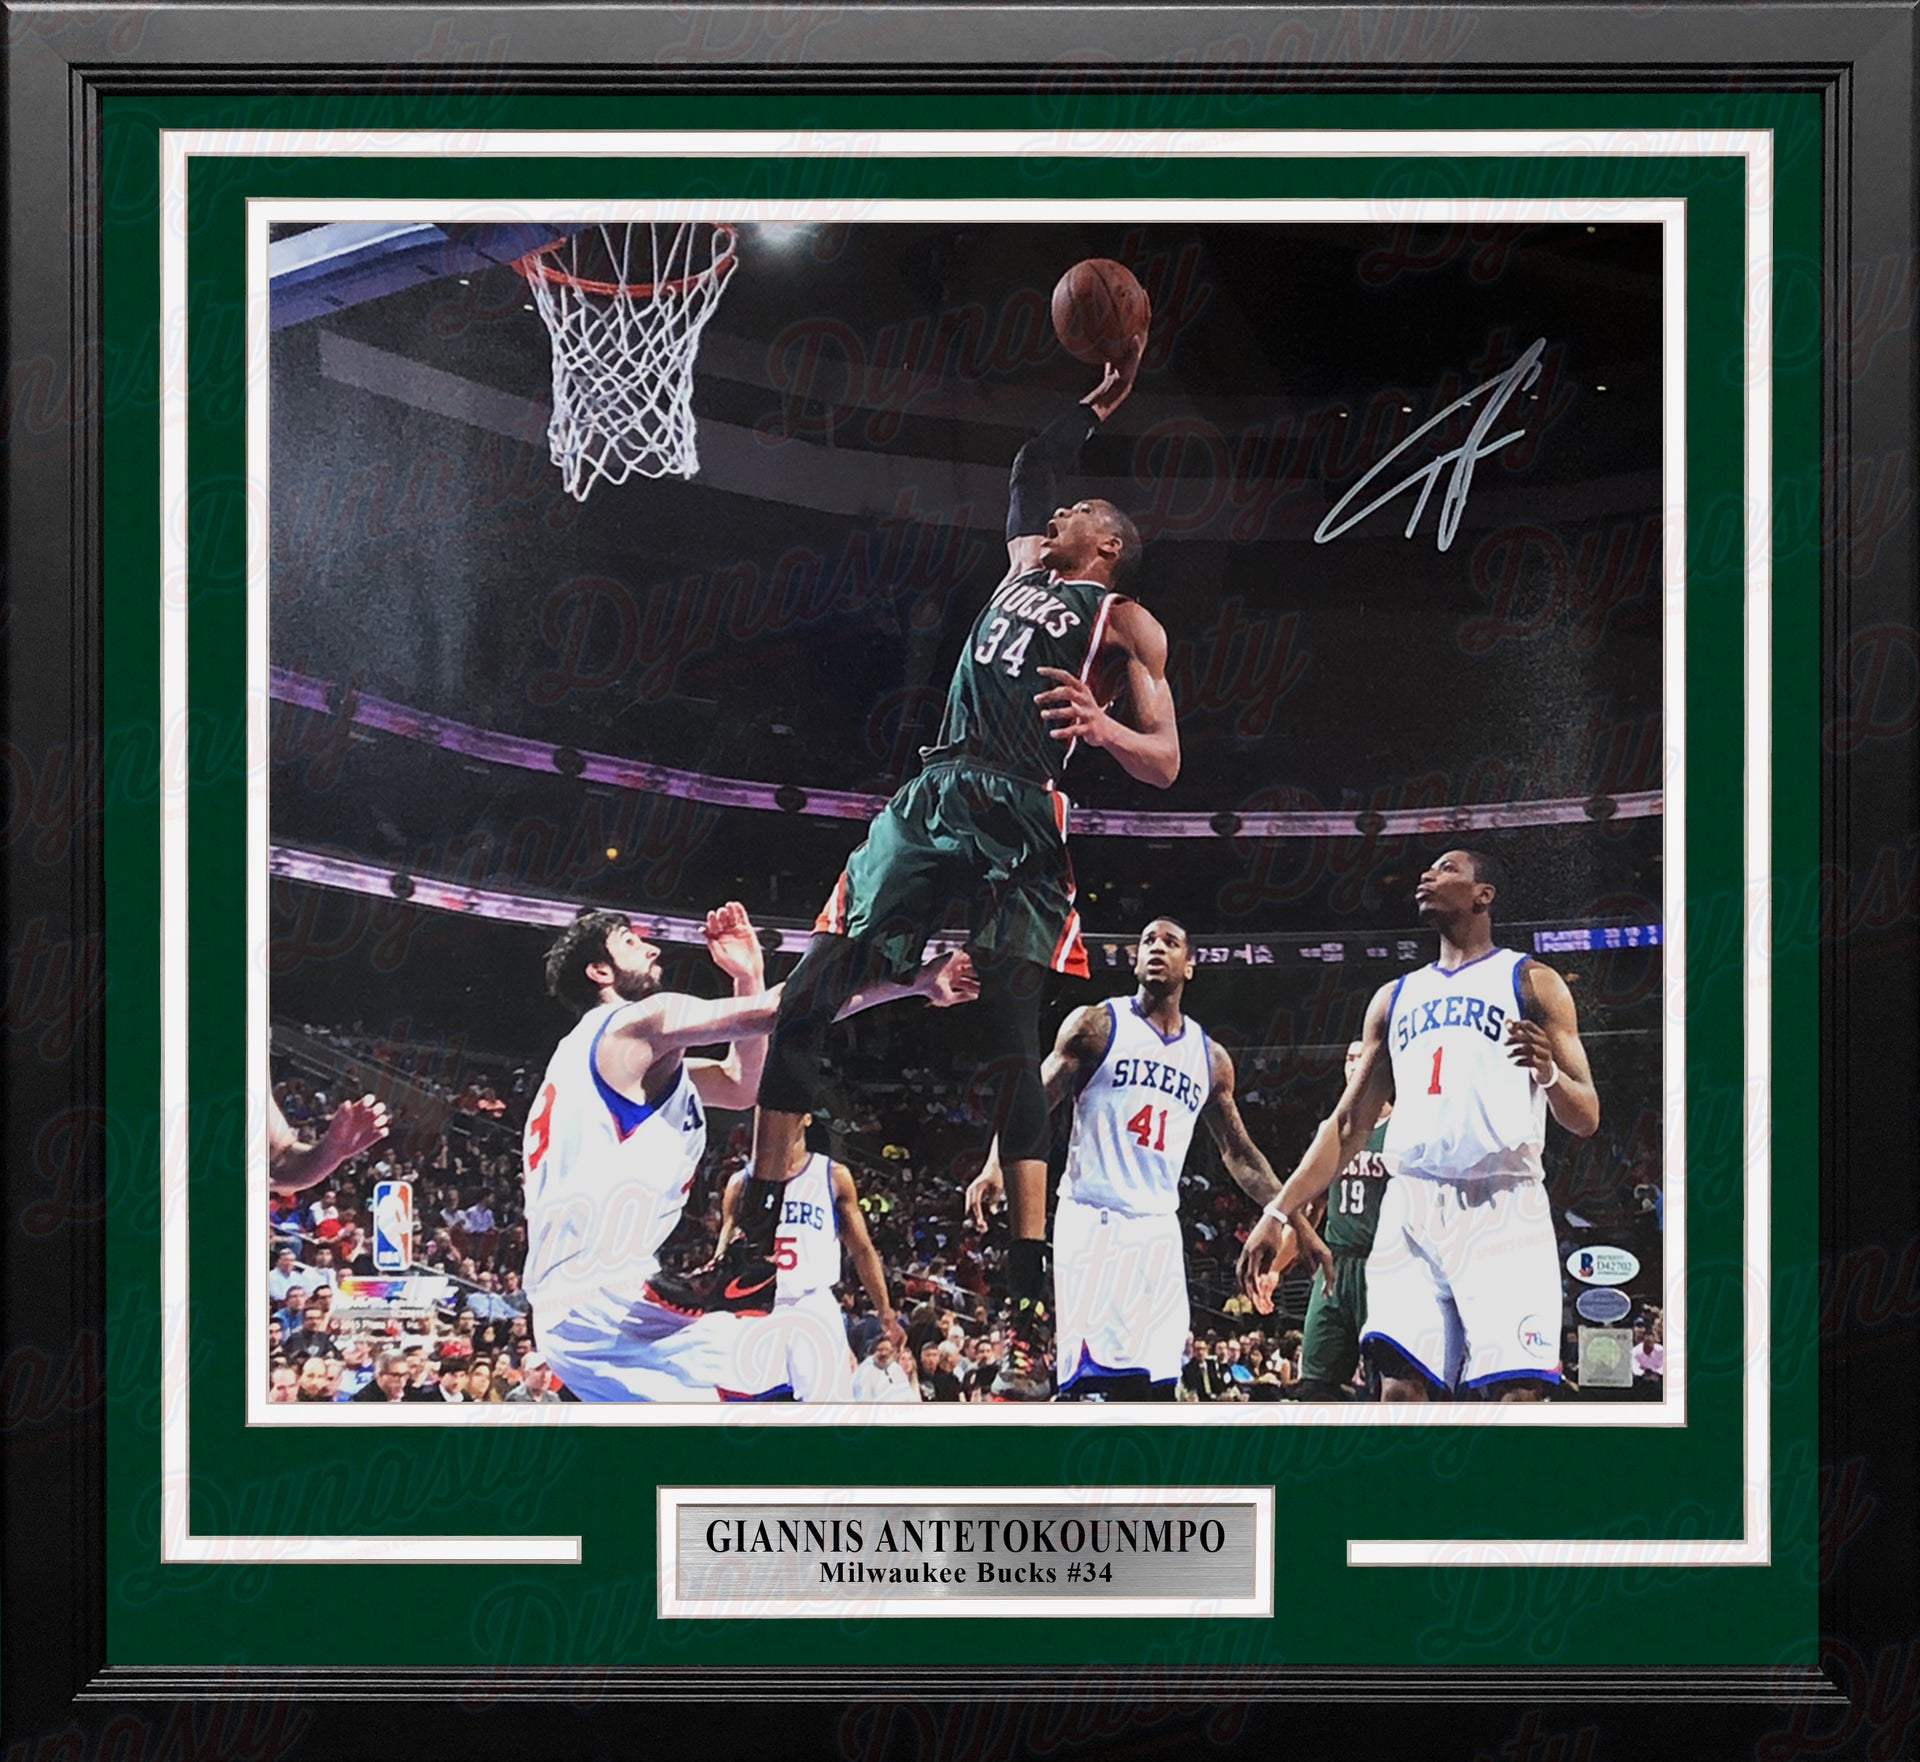 Giannis Antetokounmpo Authentic Signed Framed 16x20 Photo Autographed